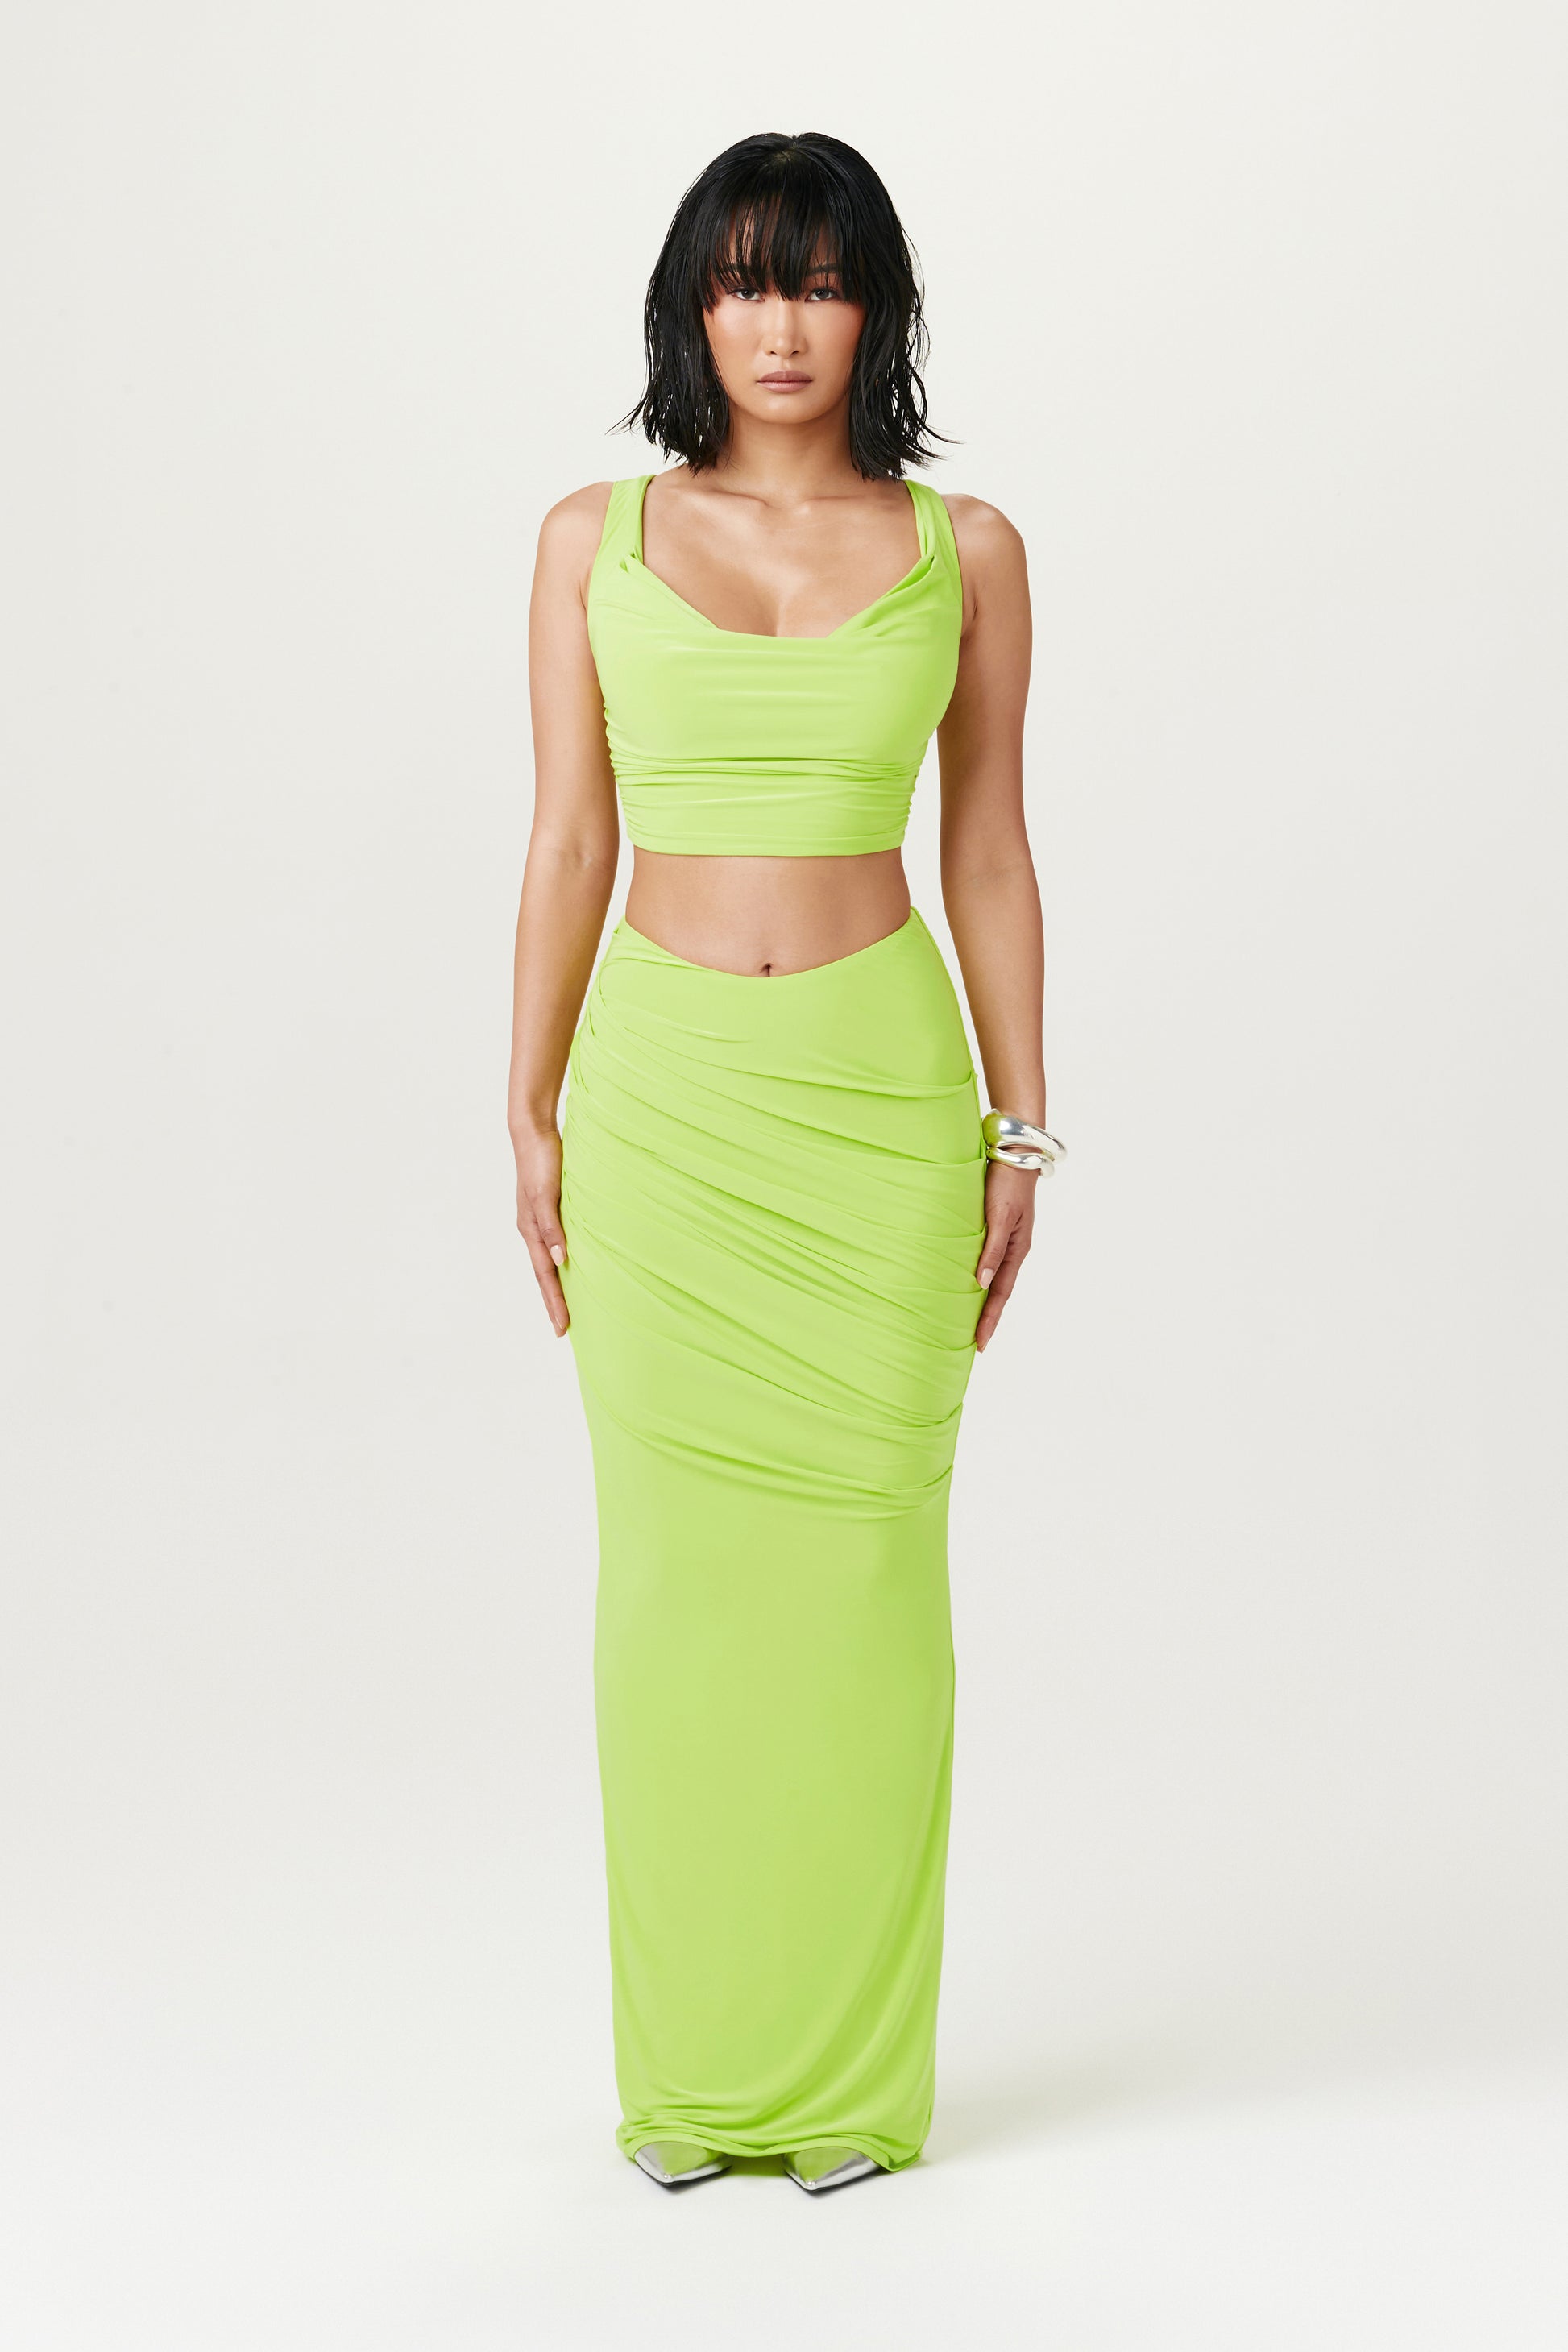 full body image of woman wearing lime green maxi skirt and matching crop top